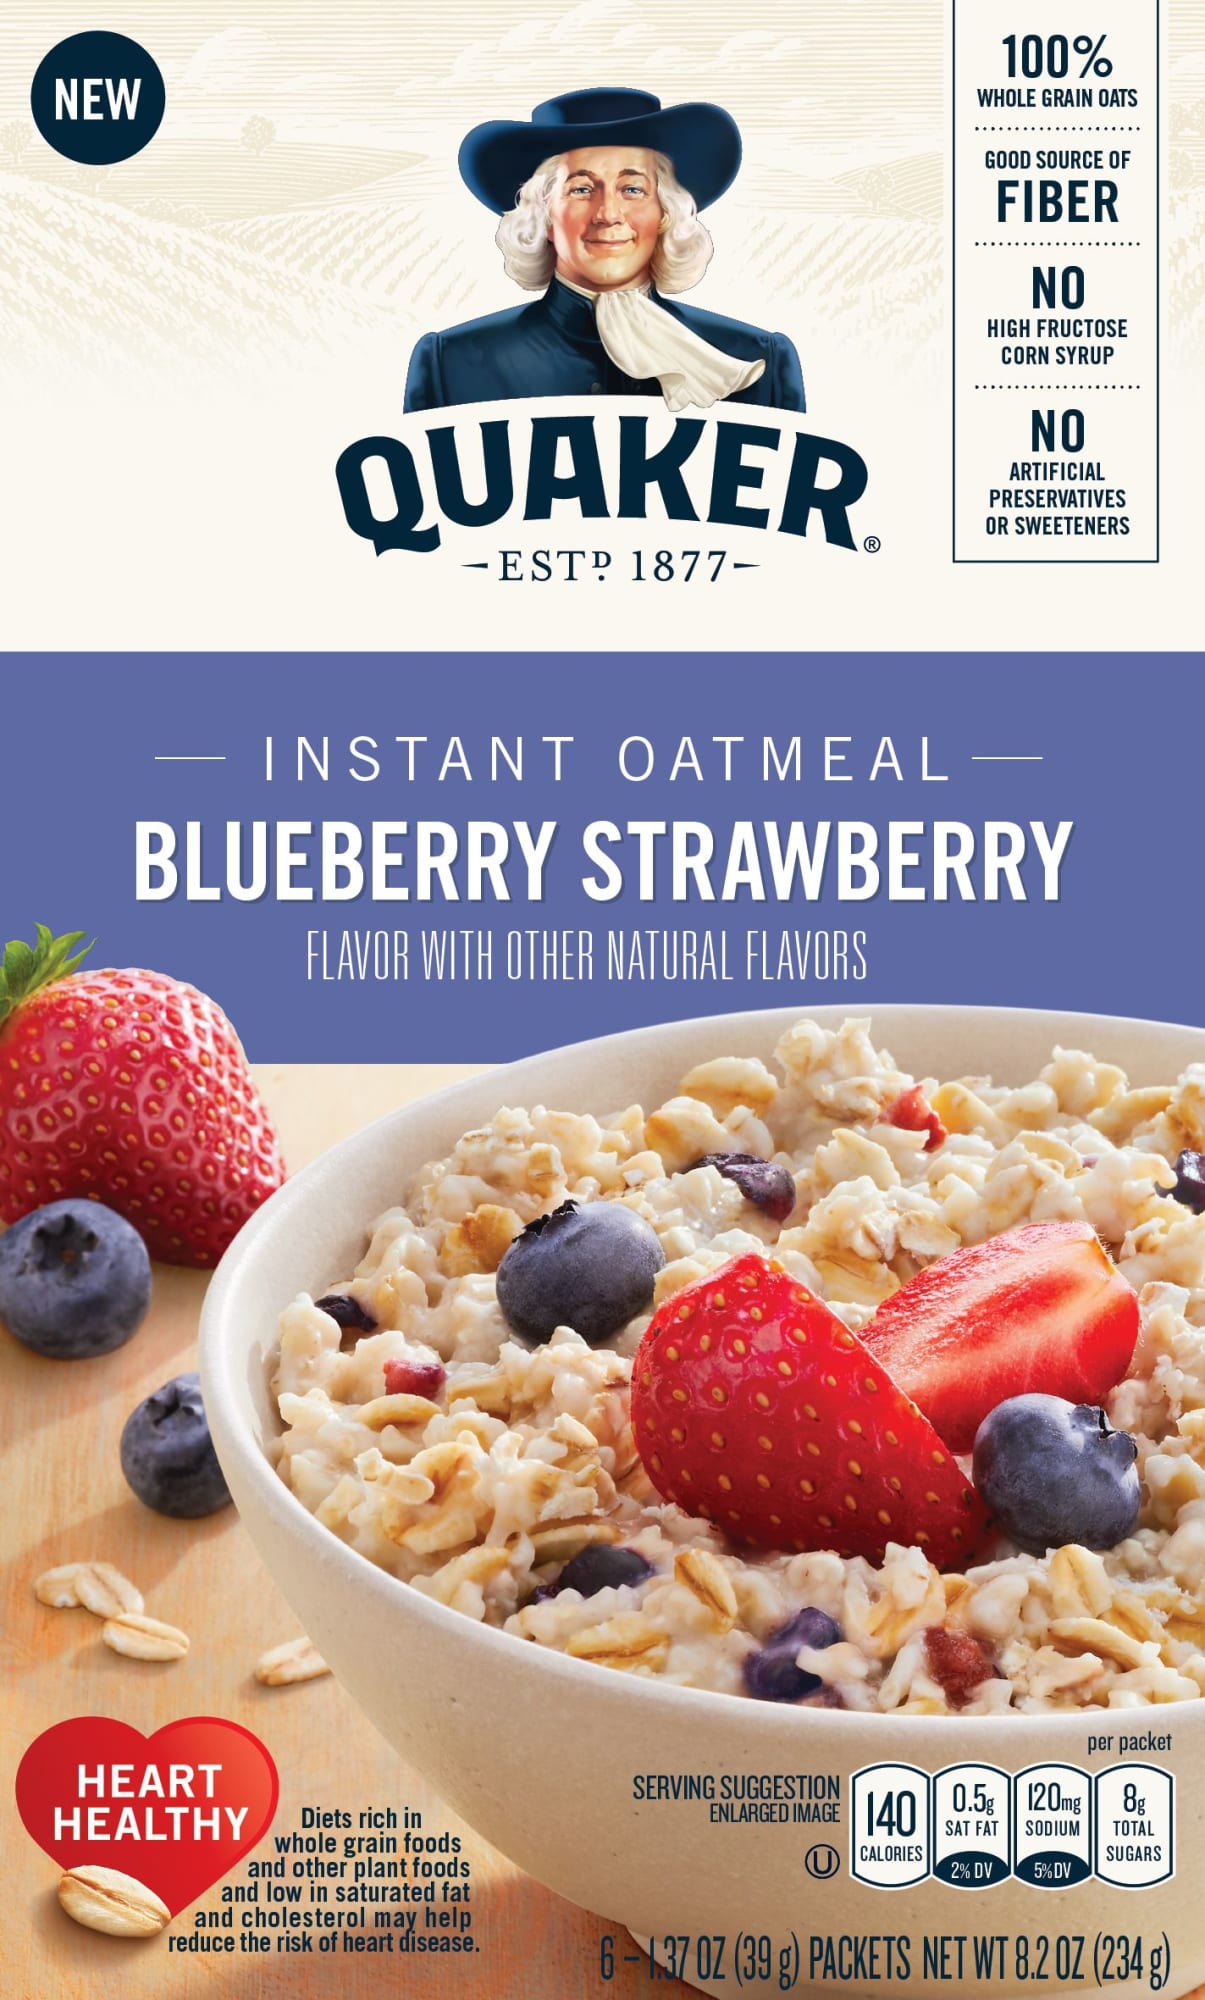 Quaker Oats has a new flavor to start your day with!